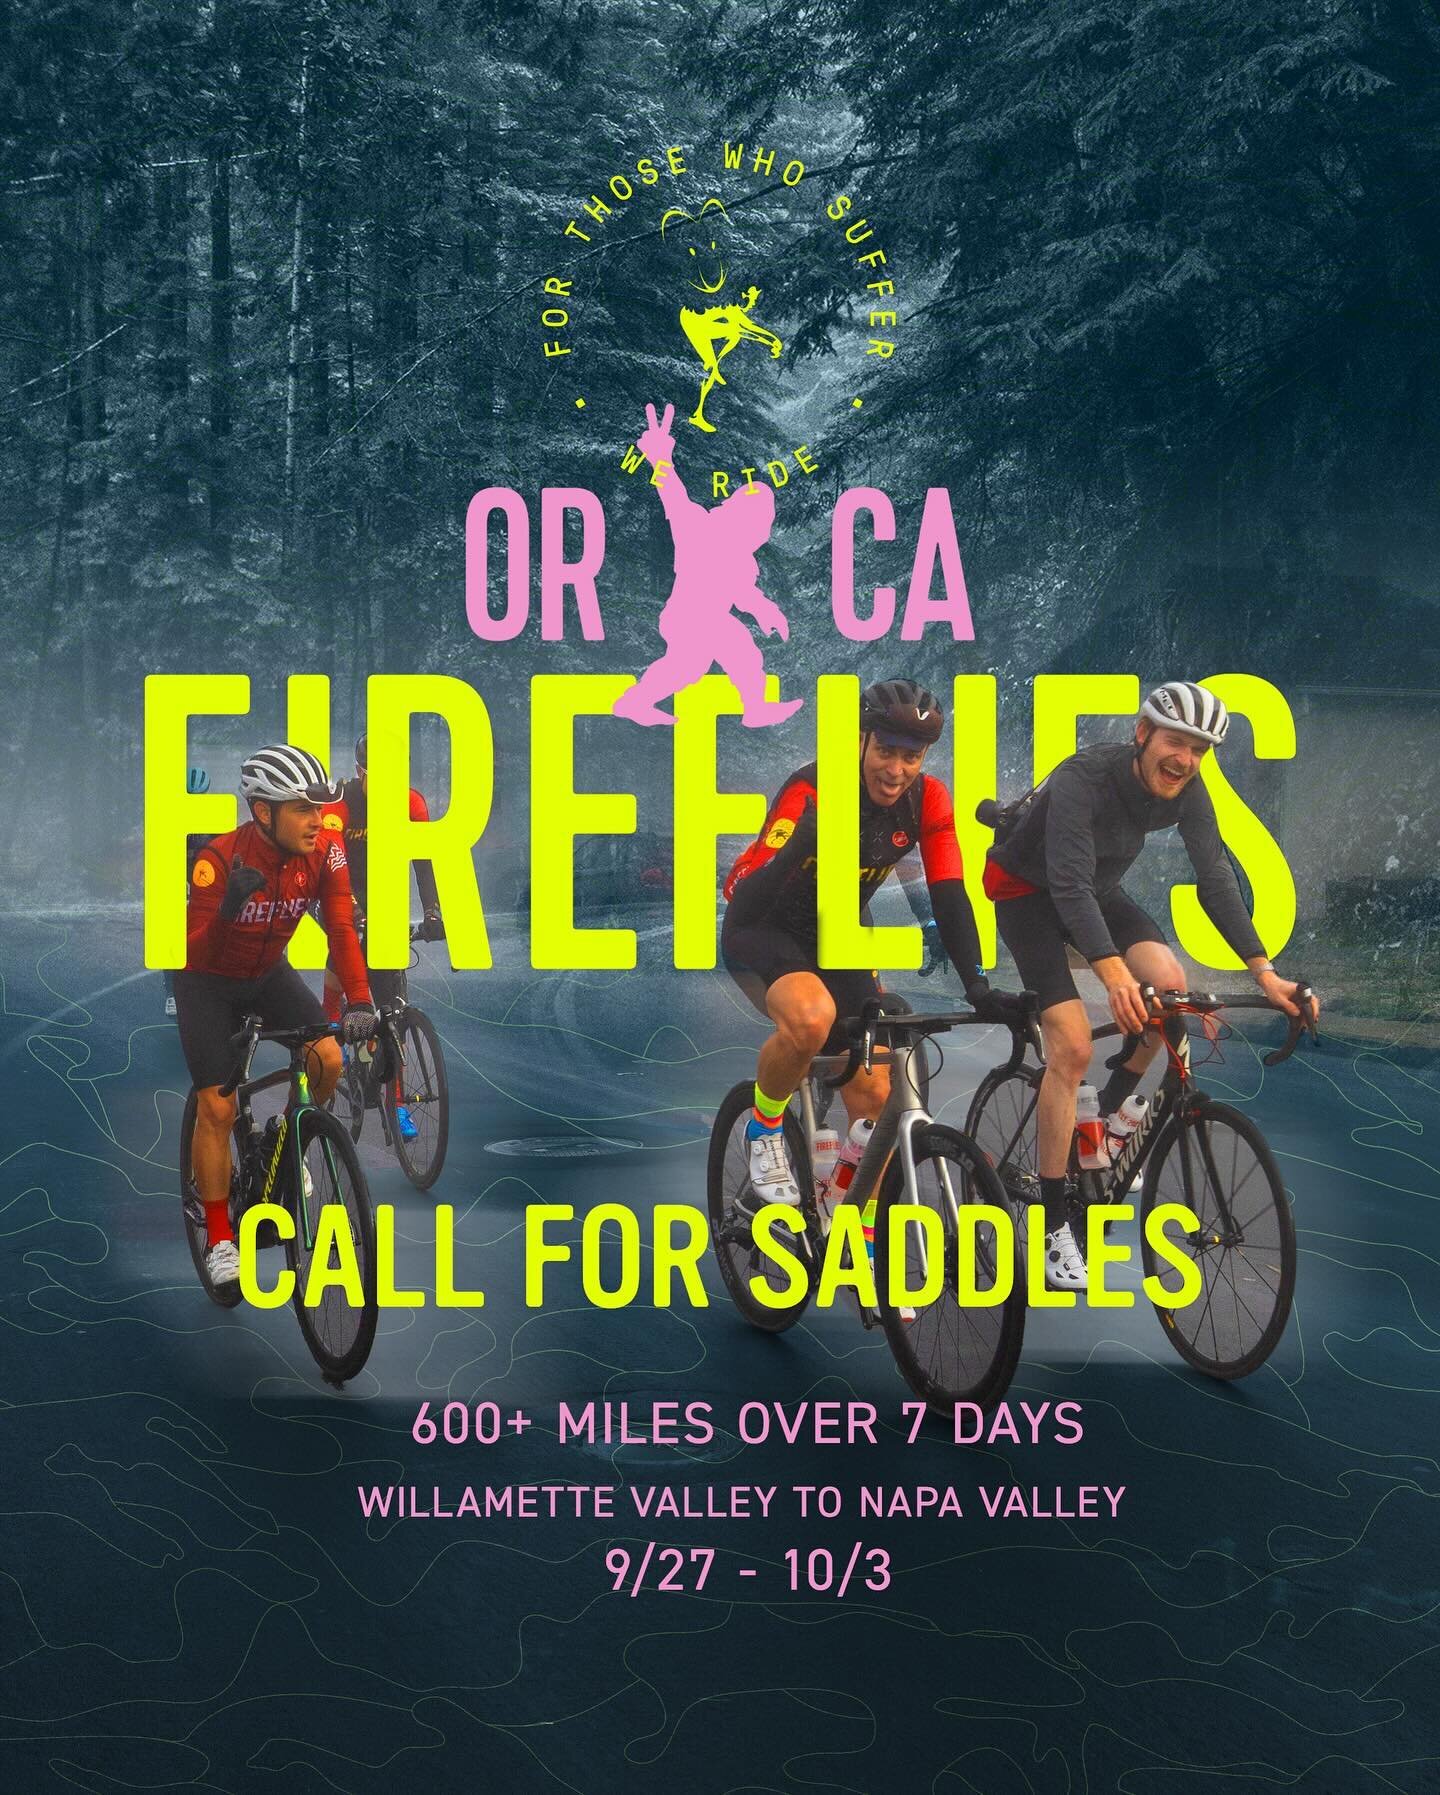 It&rsquo;s time&hellip; this years call to saddles for the West Coast Fireflies&rsquo;s tour is officially open. Our DS for this year is @billiams and with his amazing producer team and support staff are looking for riders who can raise money for @ci